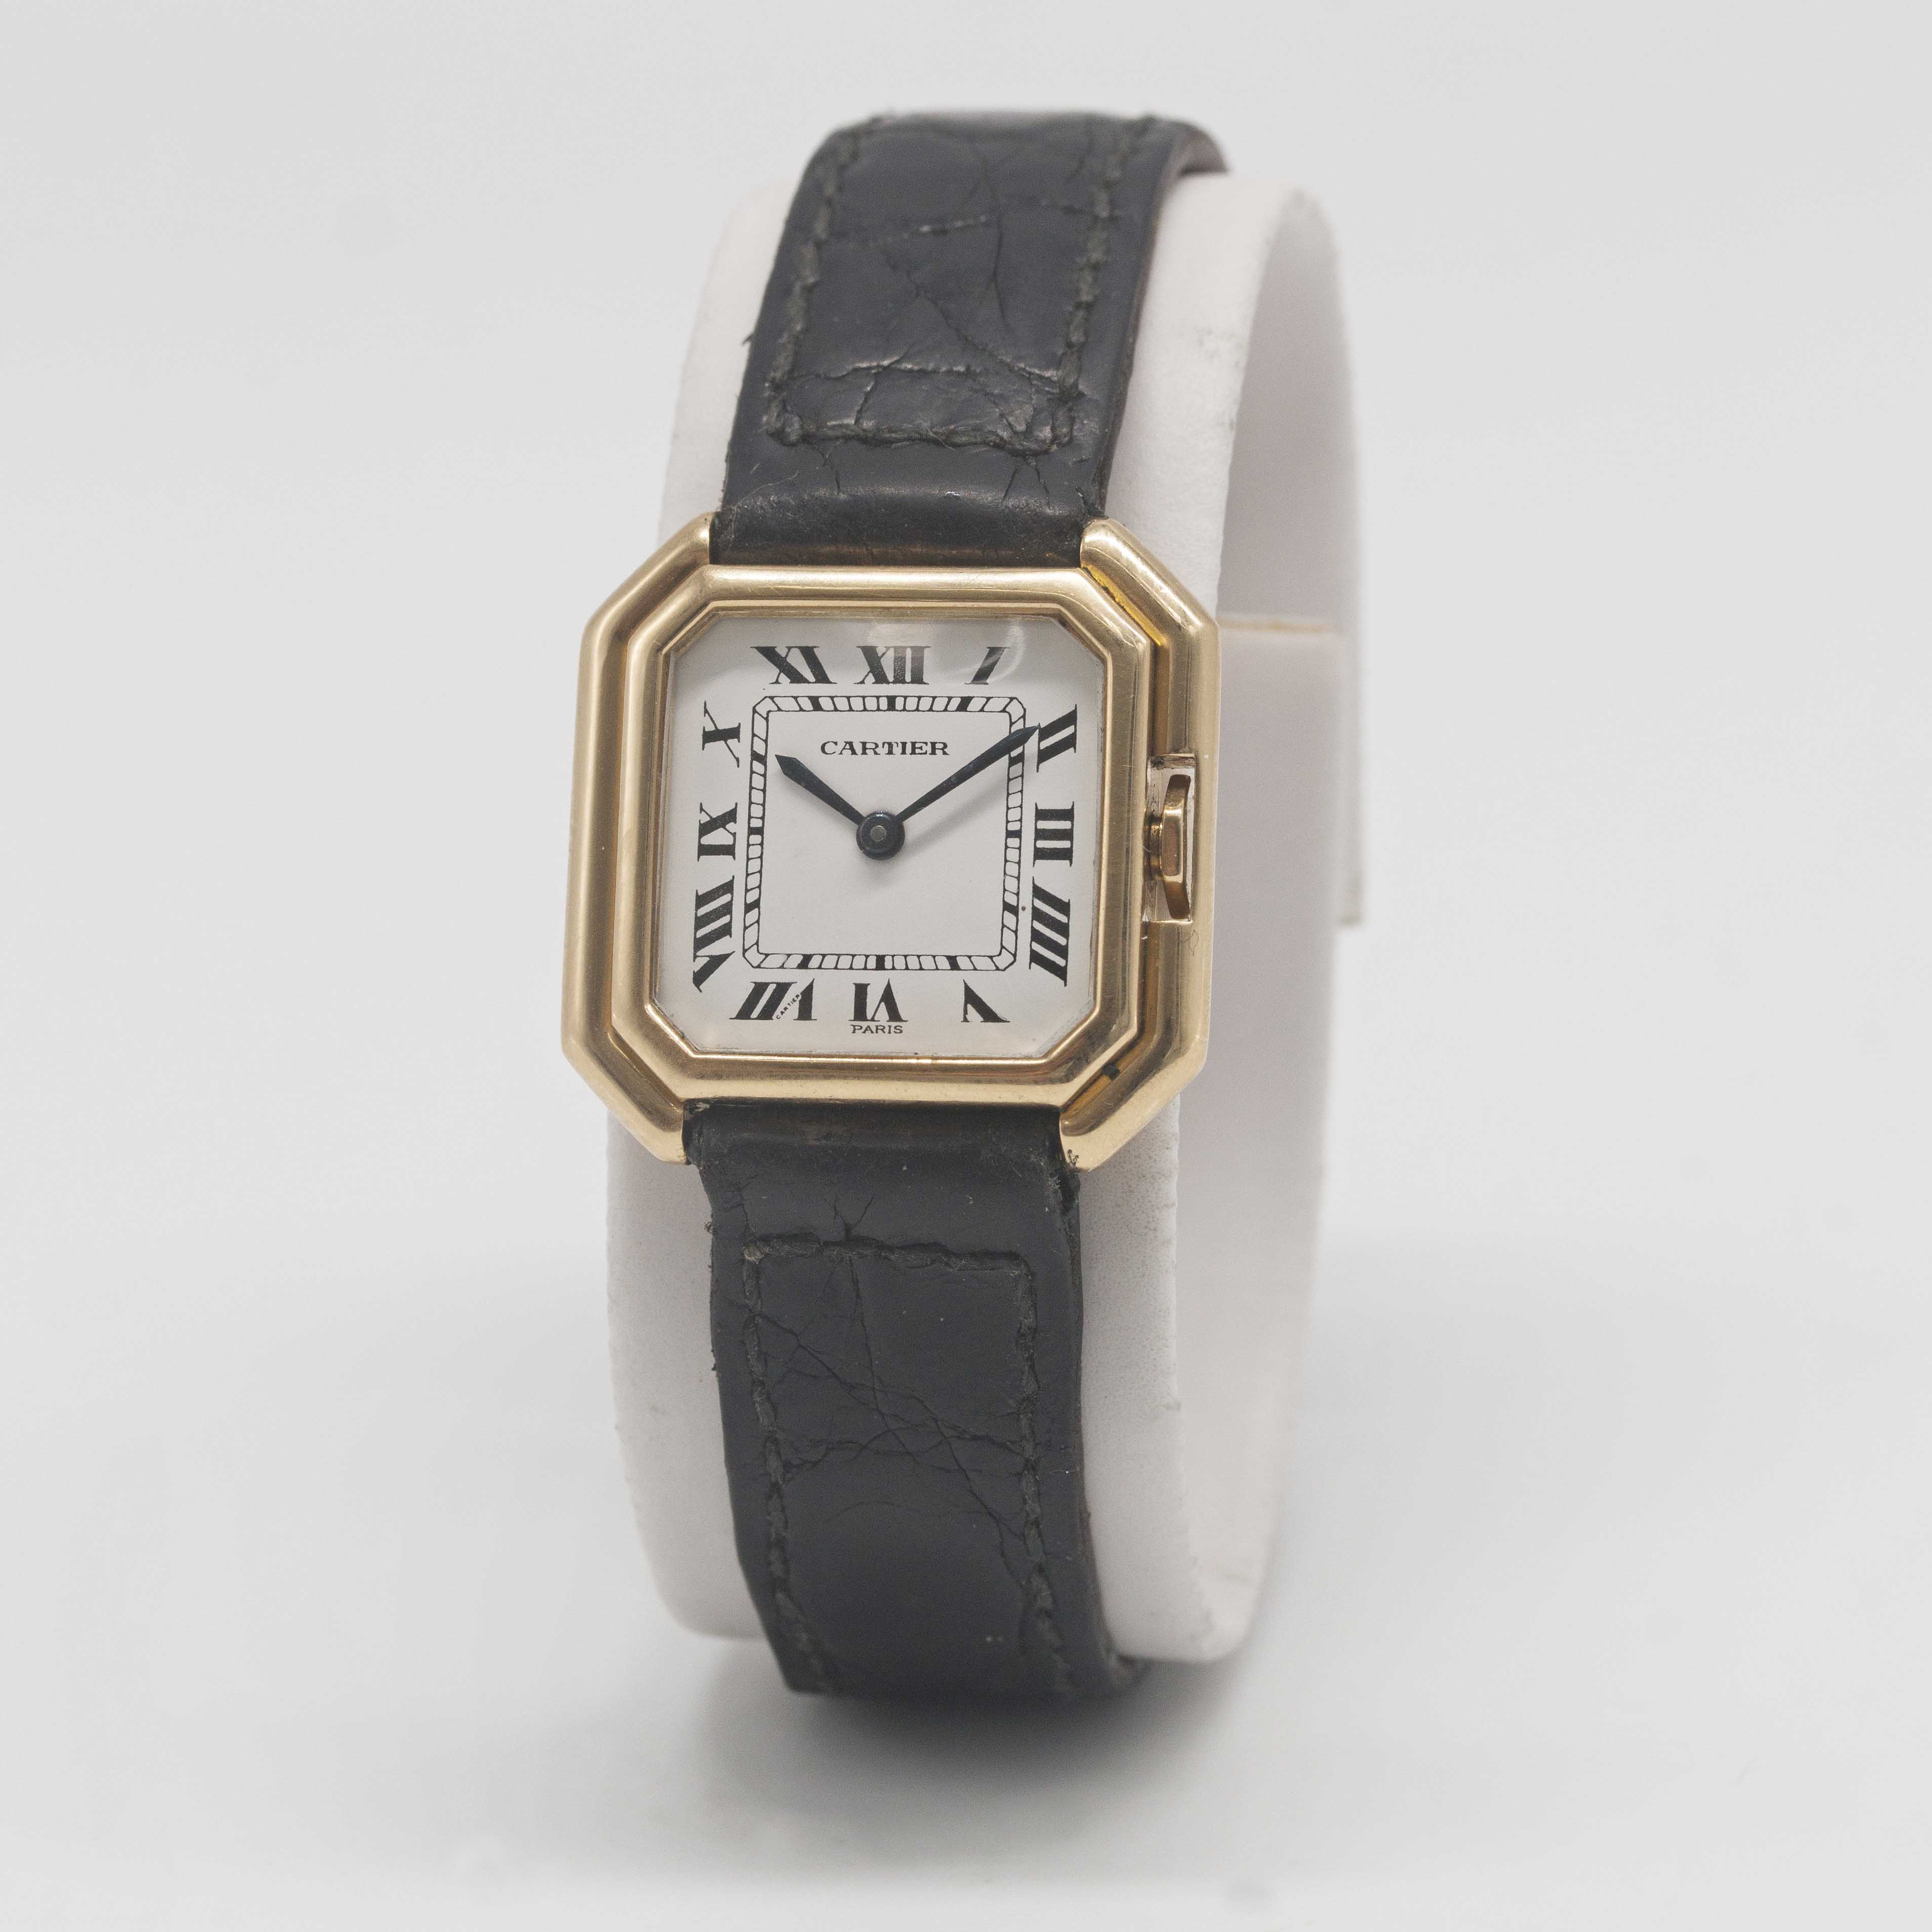 A LADIES 18K SOLID GOLD CARTIER CEINTURE WRIST WATCH CIRCA 1980 Movement: 17J, manual wind, cal. - Image 3 of 11